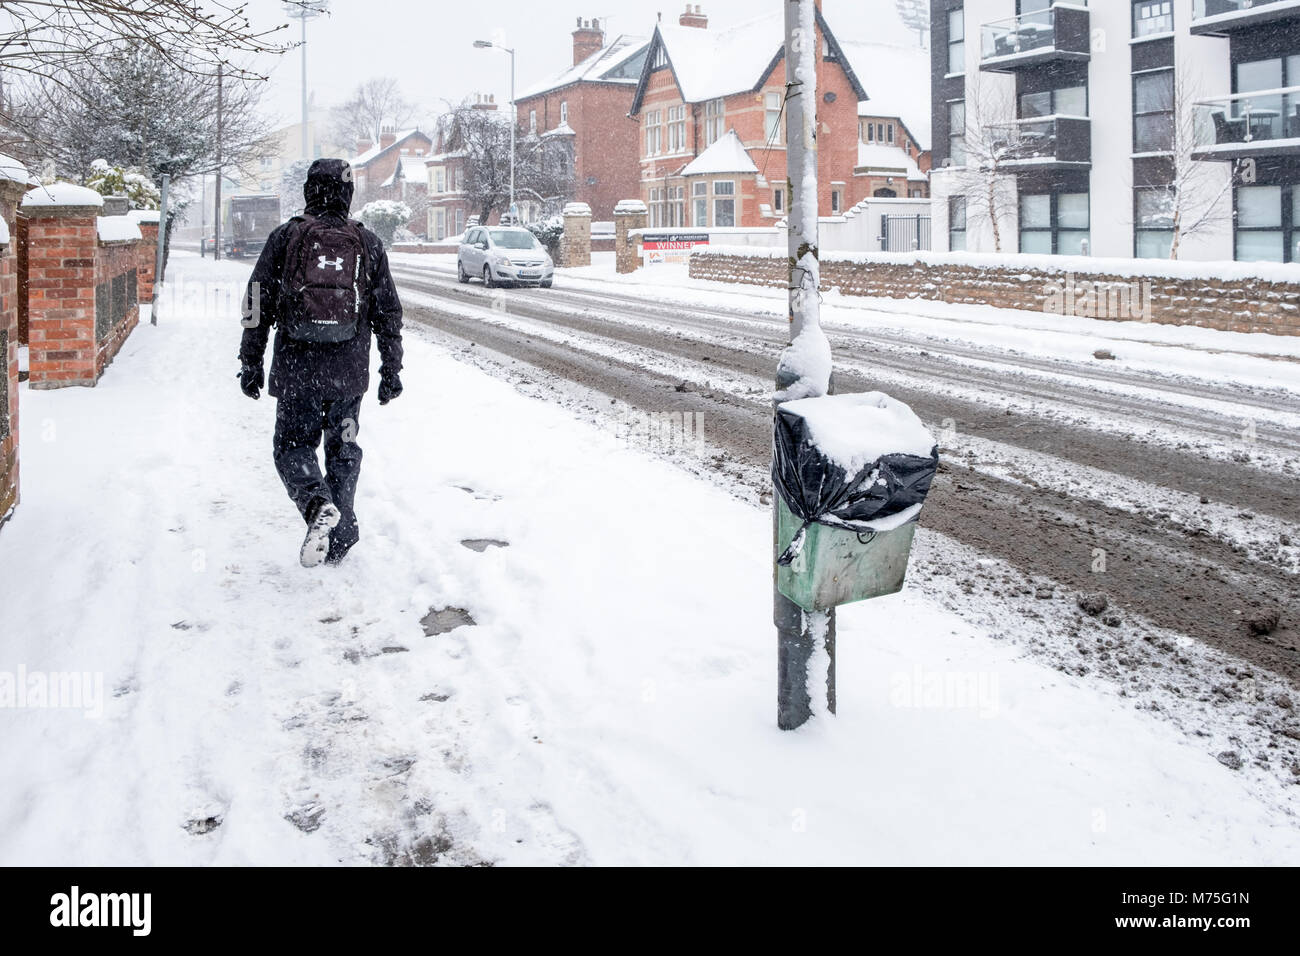 Cold Winter day. A person walking along a pavement with falling snow and a road with snow and slush, West Bridgford, Nottinghamshire, England, UK Stock Photo